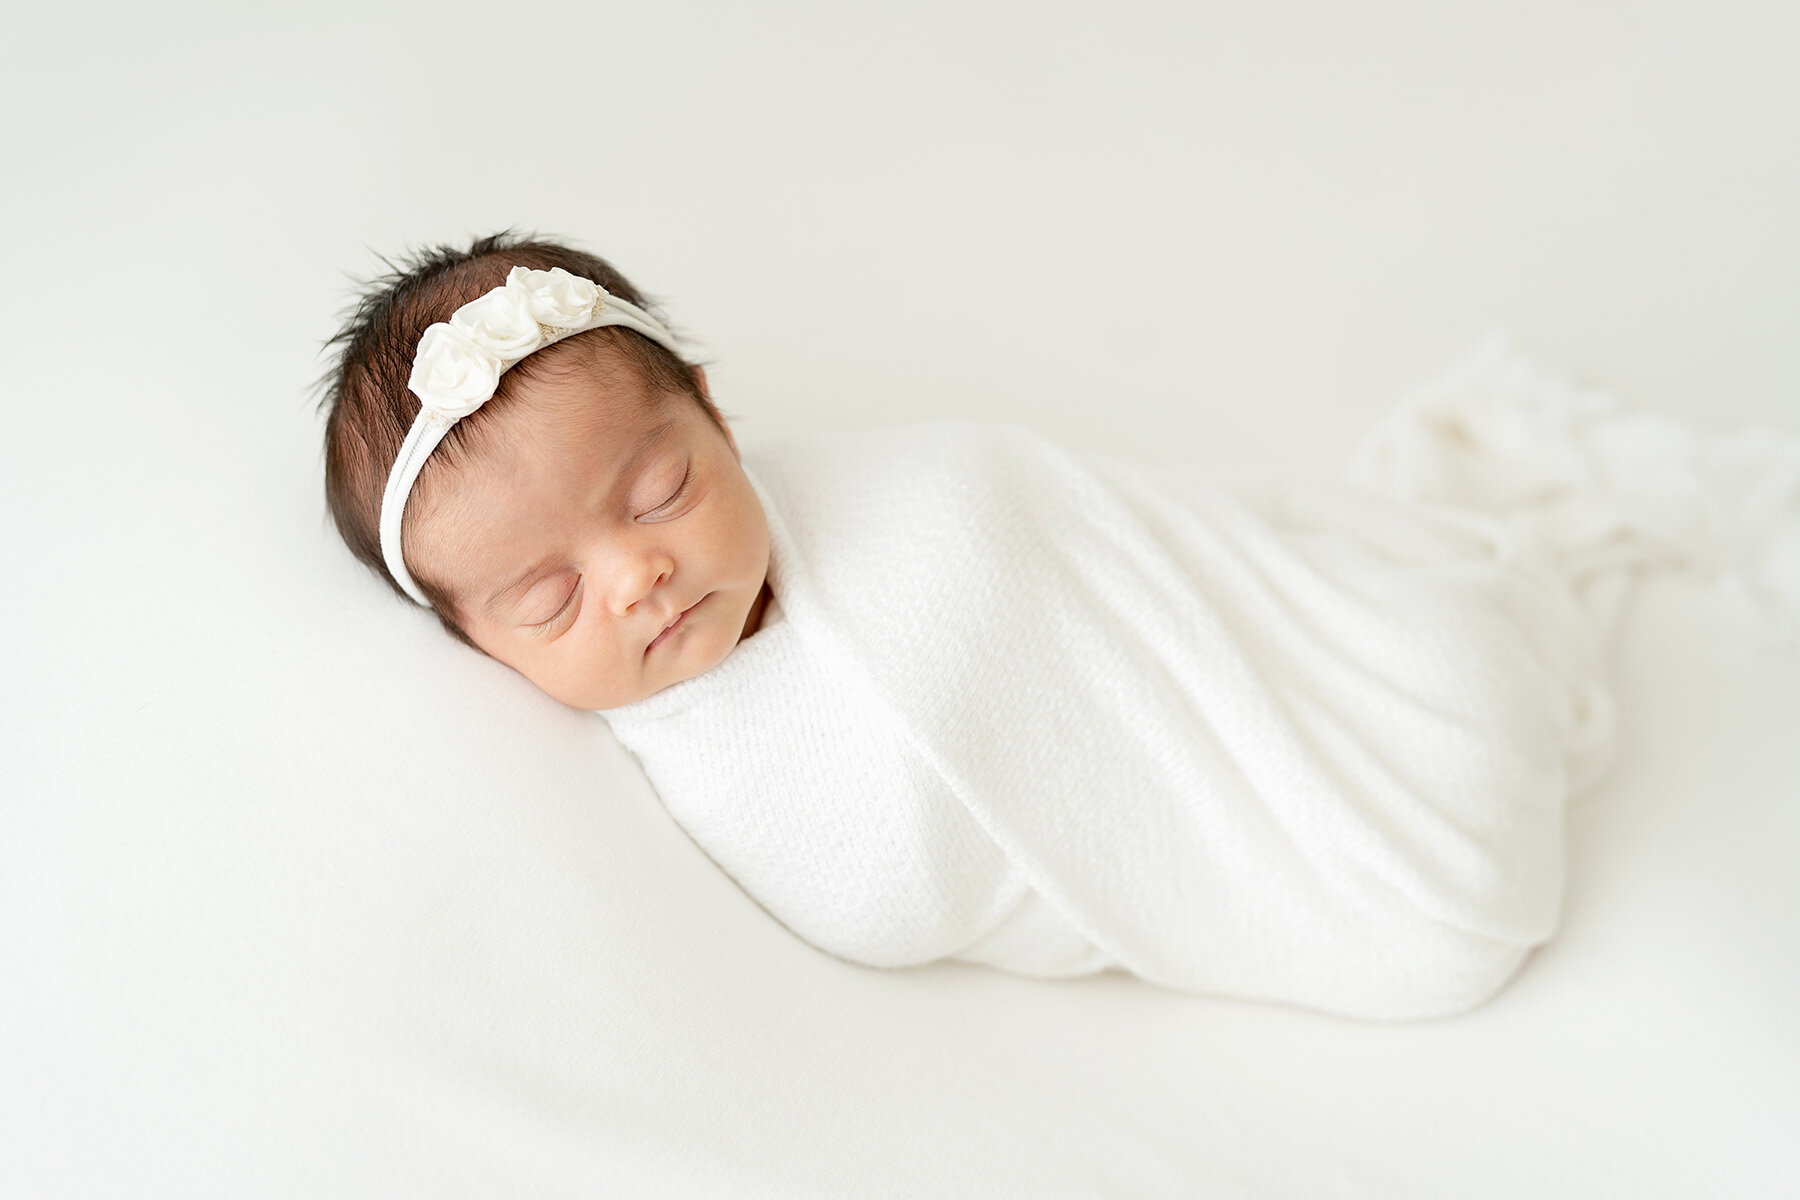 Simply styled white photography studio session. Sleeping baby is wrapped in white swaddle and sleeping on white blanket.